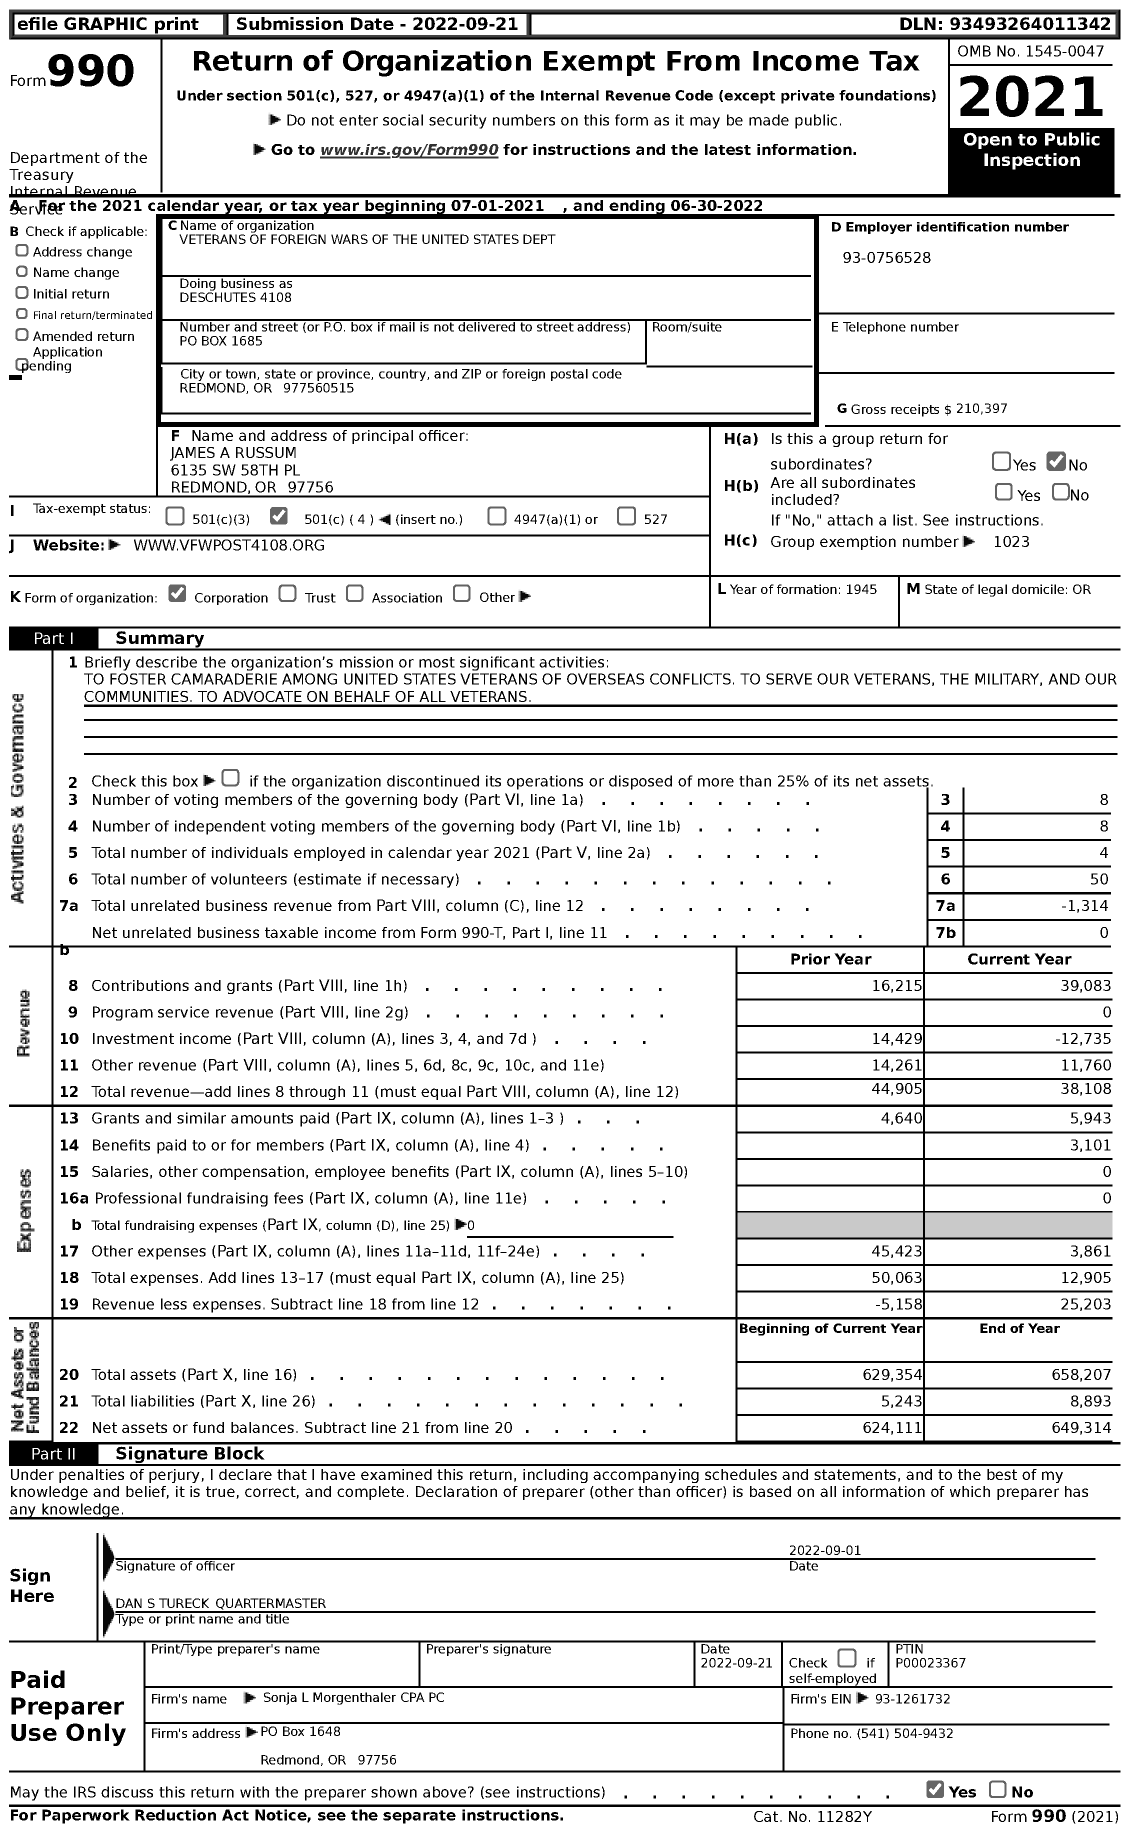 Image of first page of 2021 Form 990 for Veterans of Foreign Wars of the United States Dept - Deschutes 4108